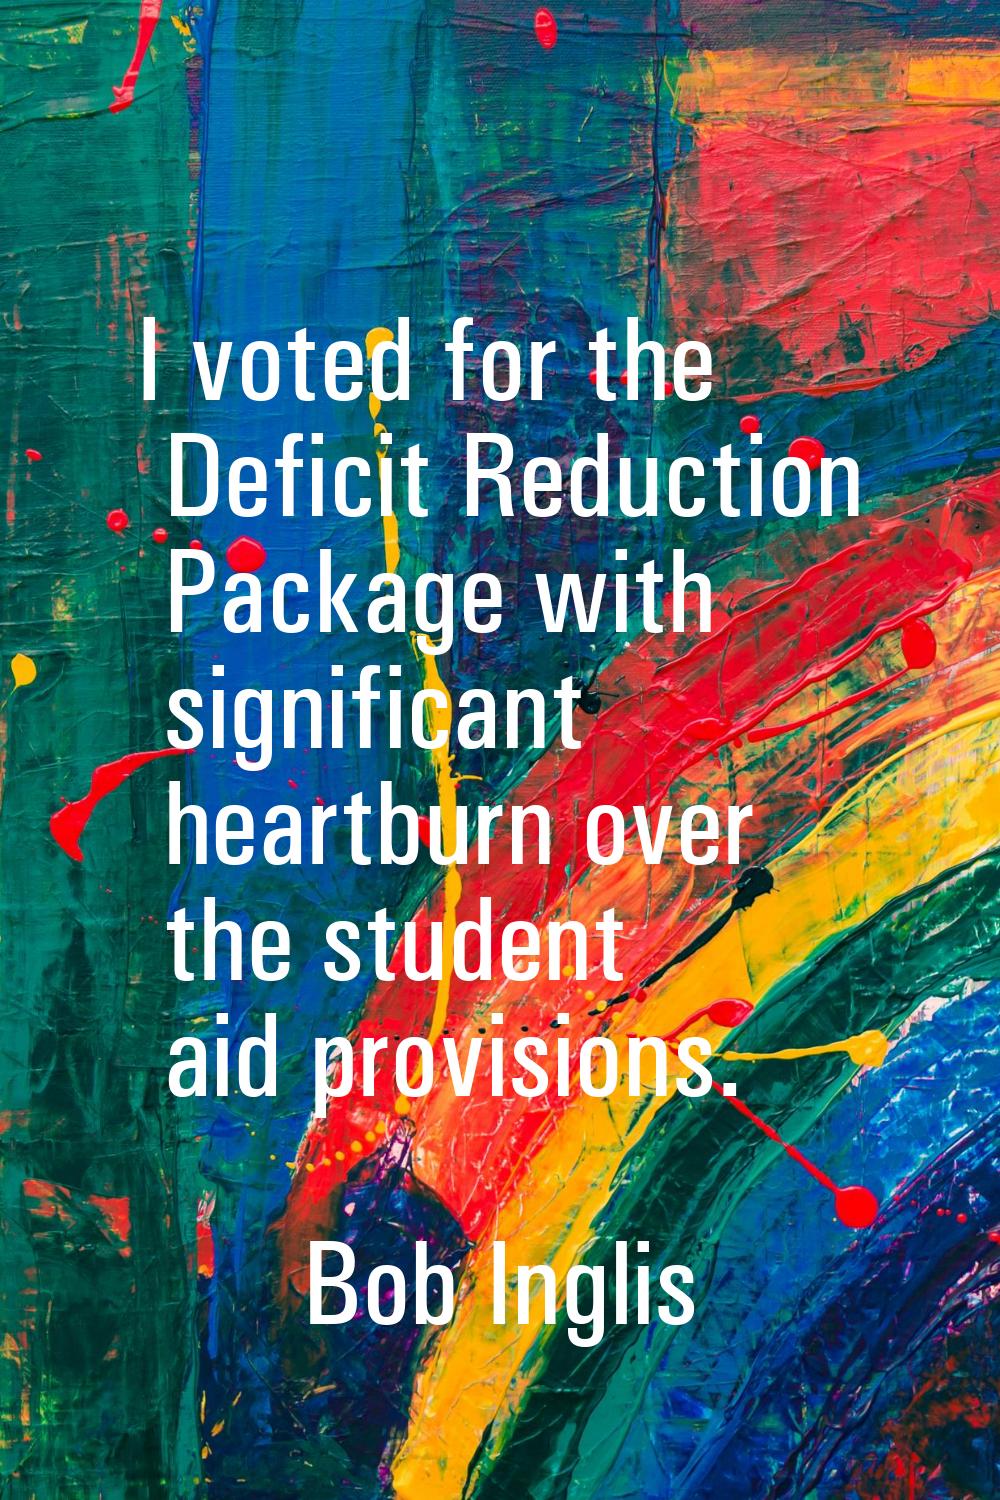 I voted for the Deficit Reduction Package with significant heartburn over the student aid provision